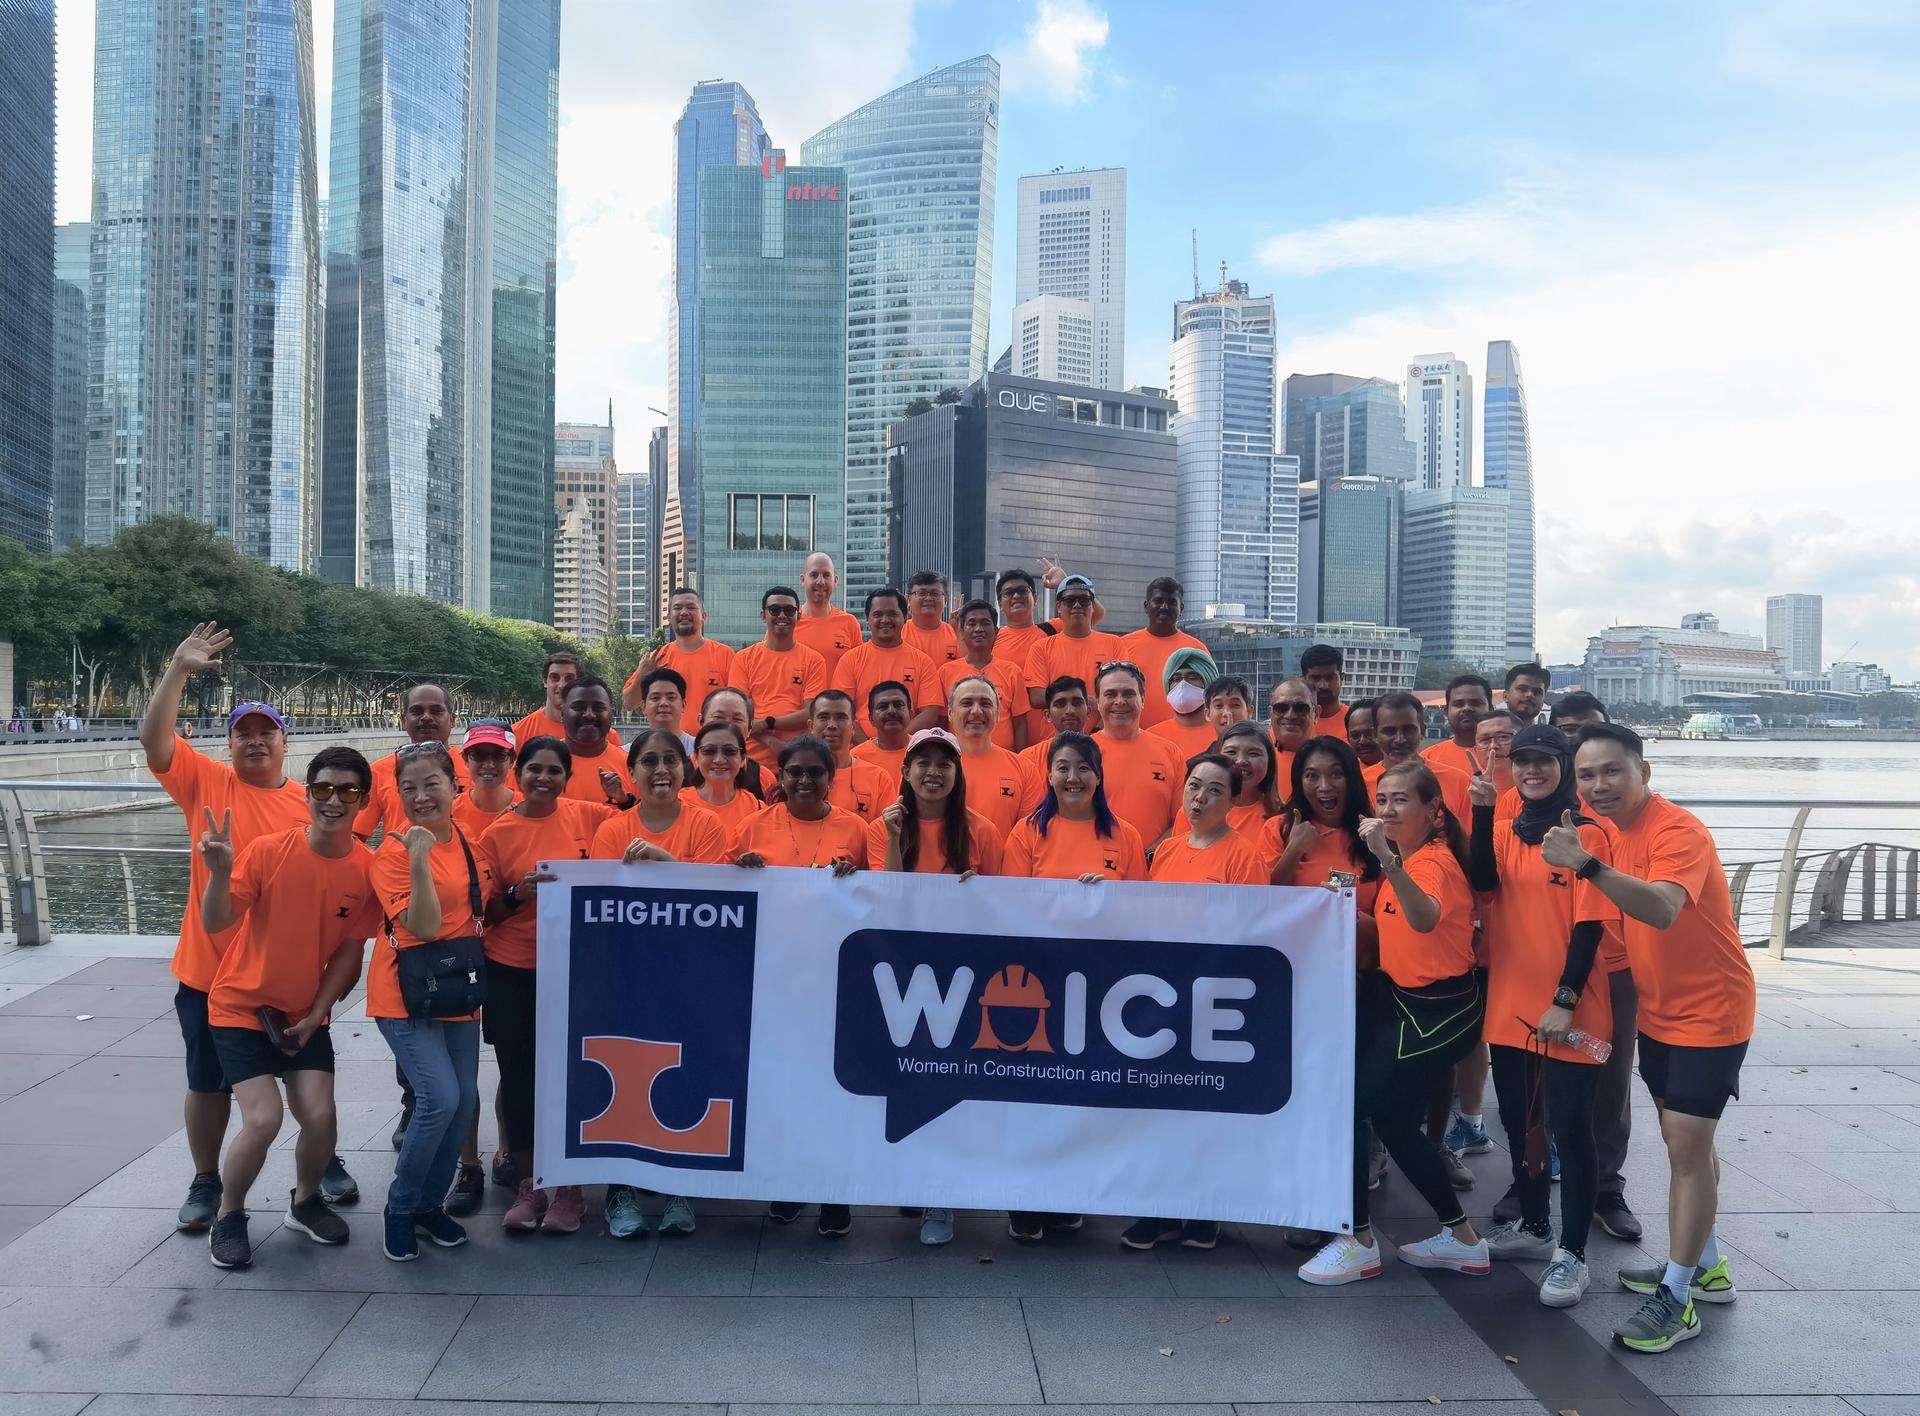 WOICE Singapore starts 2023 with a good cause